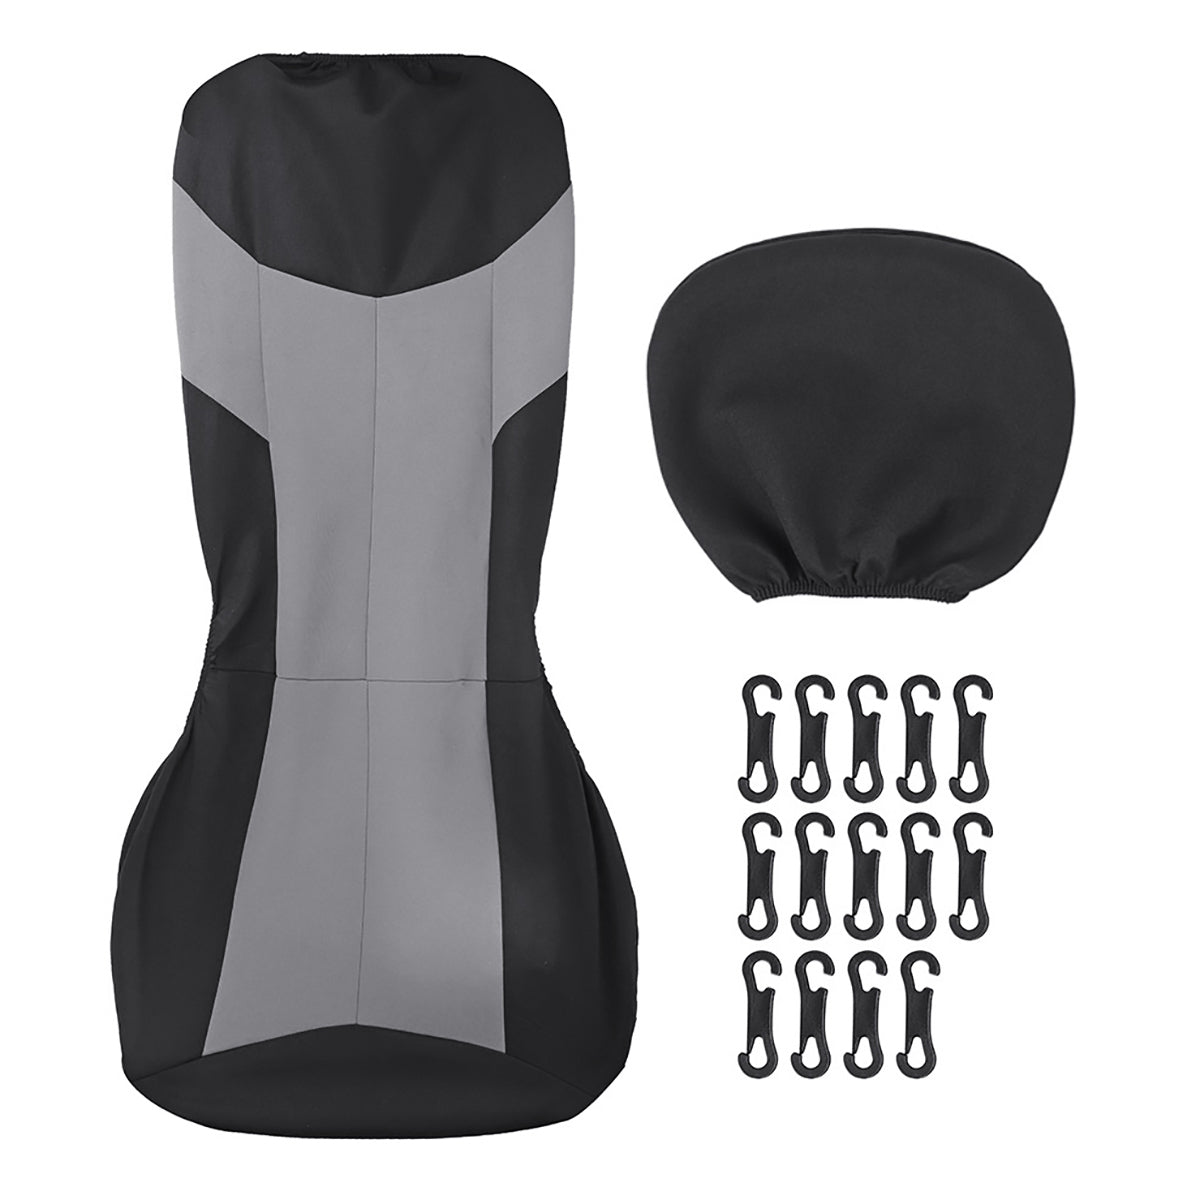 Auto Car Seat Cover Seat Protection Front Back Universal Protectors - Auto GoShop